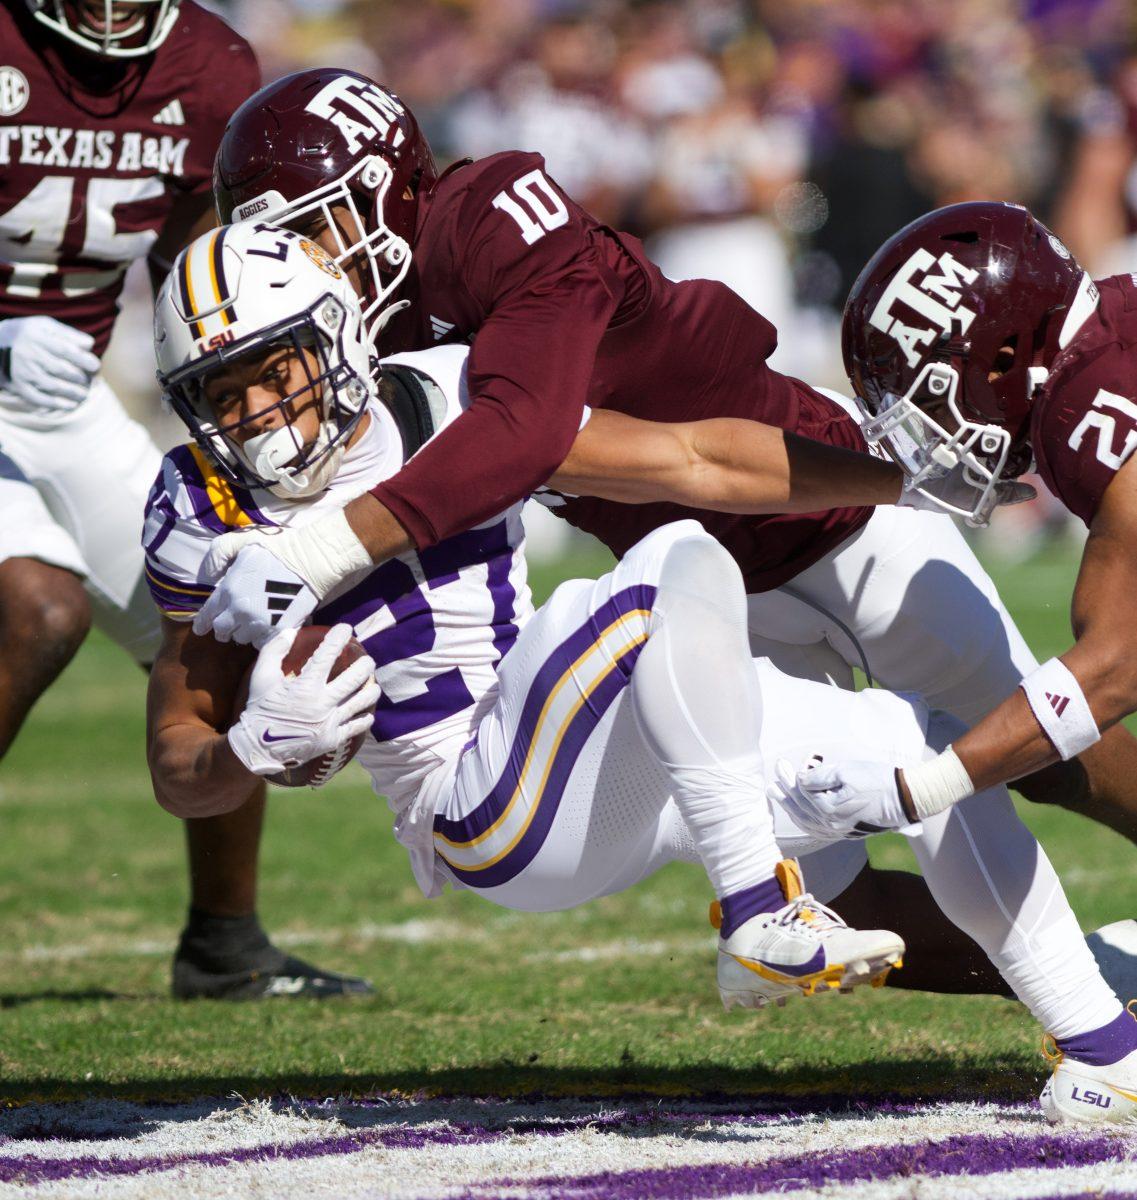 <p>Junior DL Fadil Diggs (10) tackles LSU RB Josh Williams (27) during Texas A&M's game against LSU on Saturday, Nov. 25, 2023 at Tiger Stadium (Katelynn Ivy/The Battalion)</p>